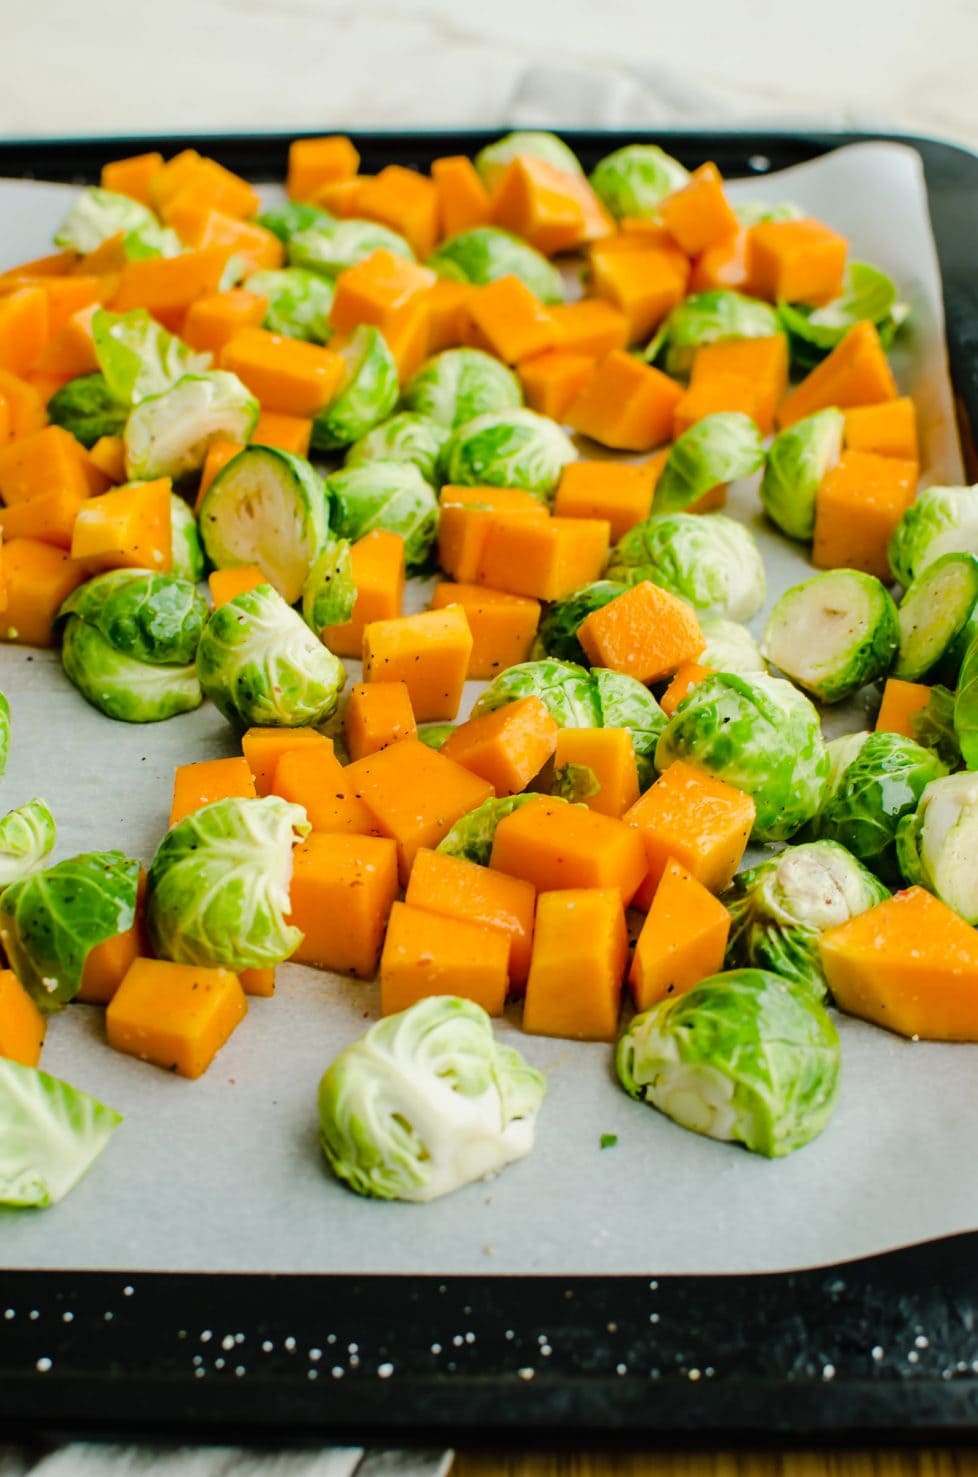 A baking sheet lined with parchment paper and filled with raw brussels sprouts and diced butternut squash.